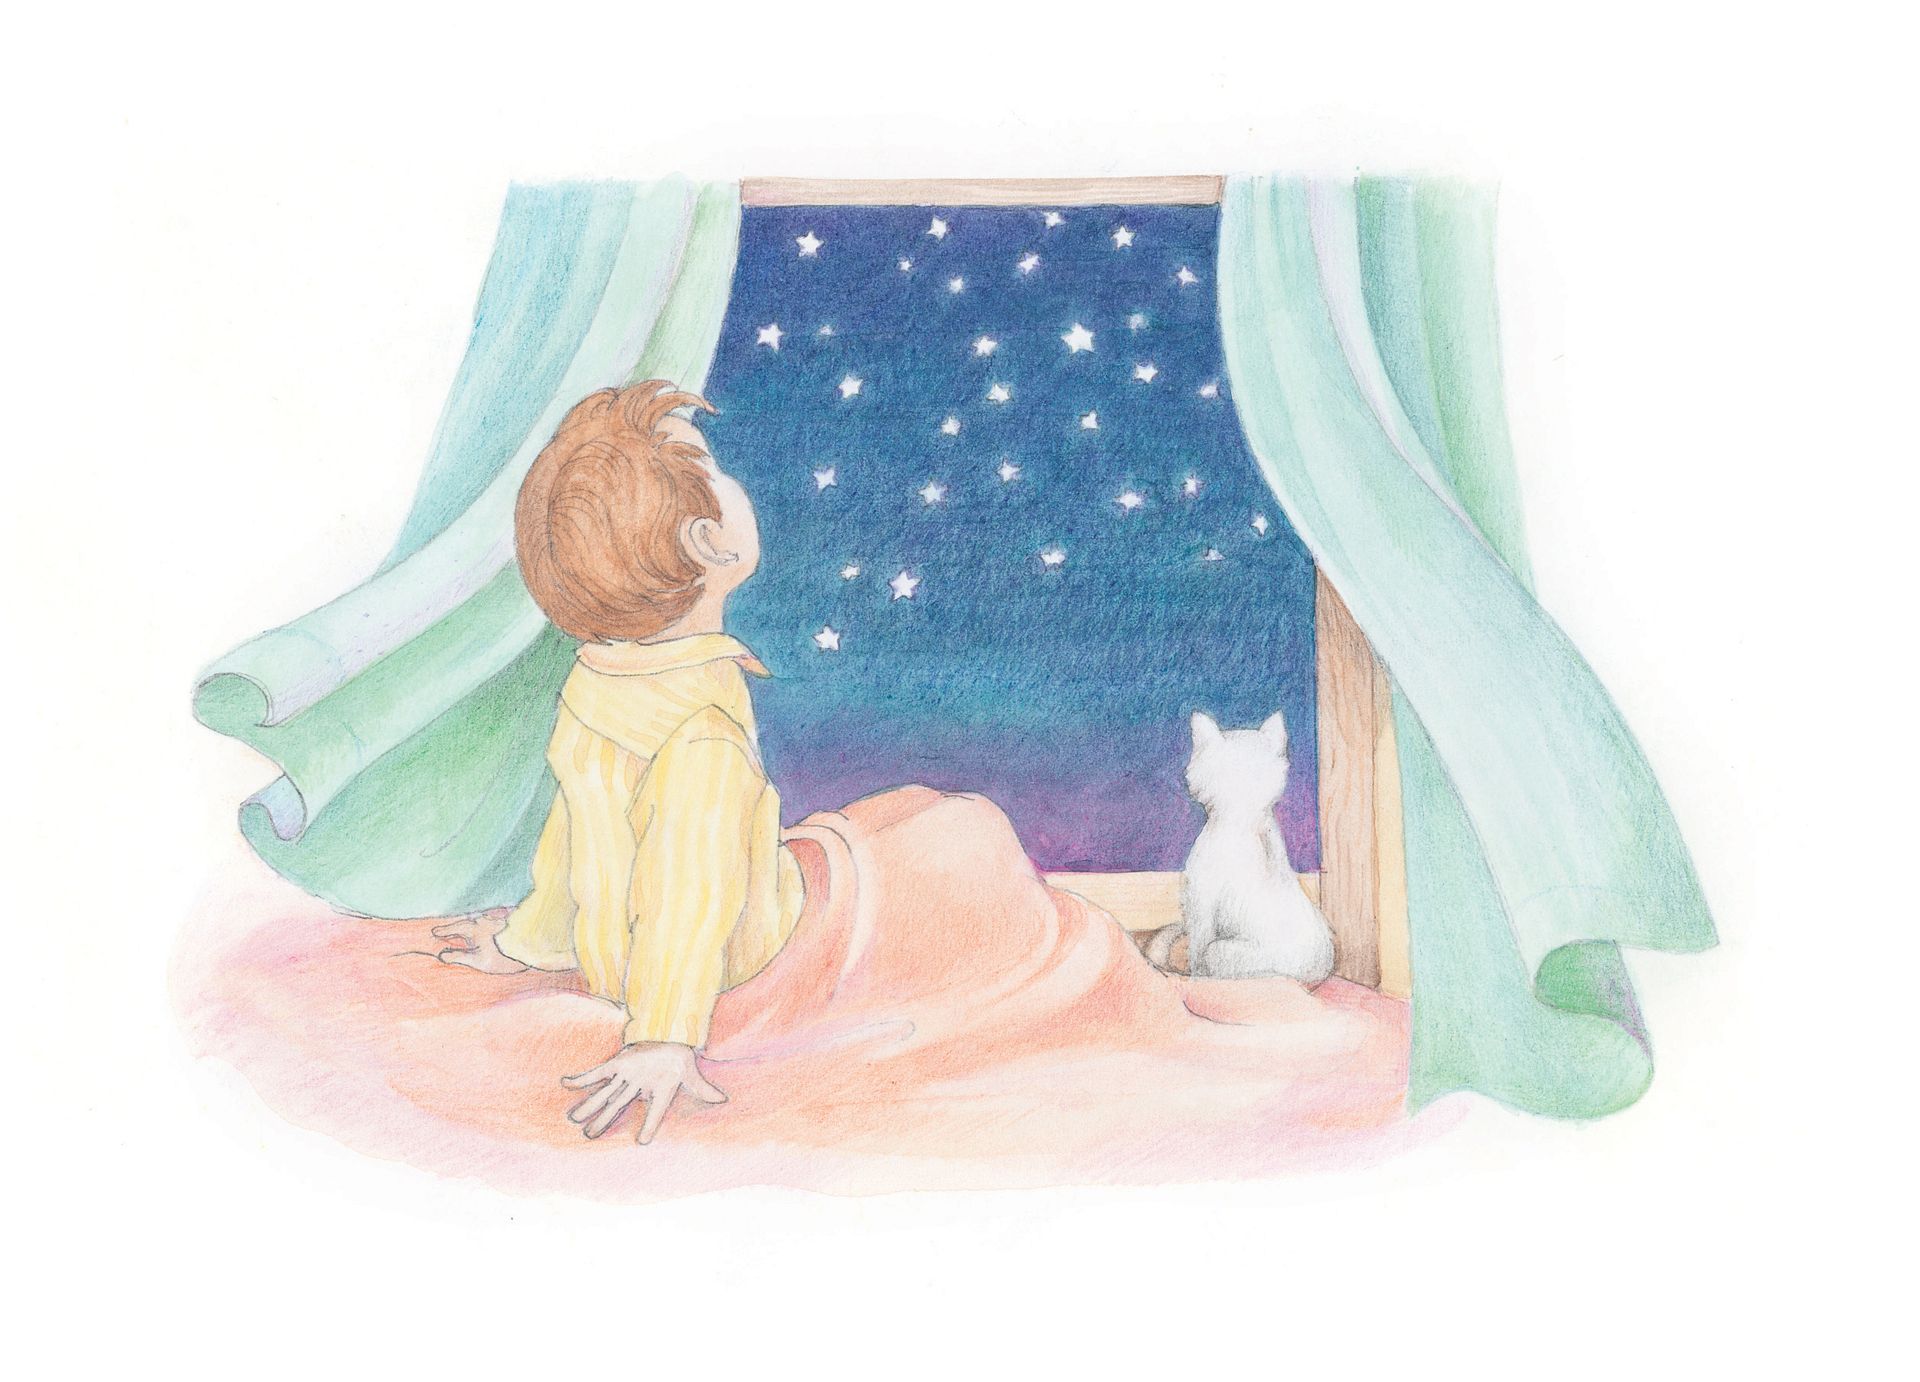 A boy and his cat looking out the window at the night sky. From the Children’s Songbook, page 8, “Father, We Thank Thee for the Night”; watercolor illustration by Phyllis Luch.